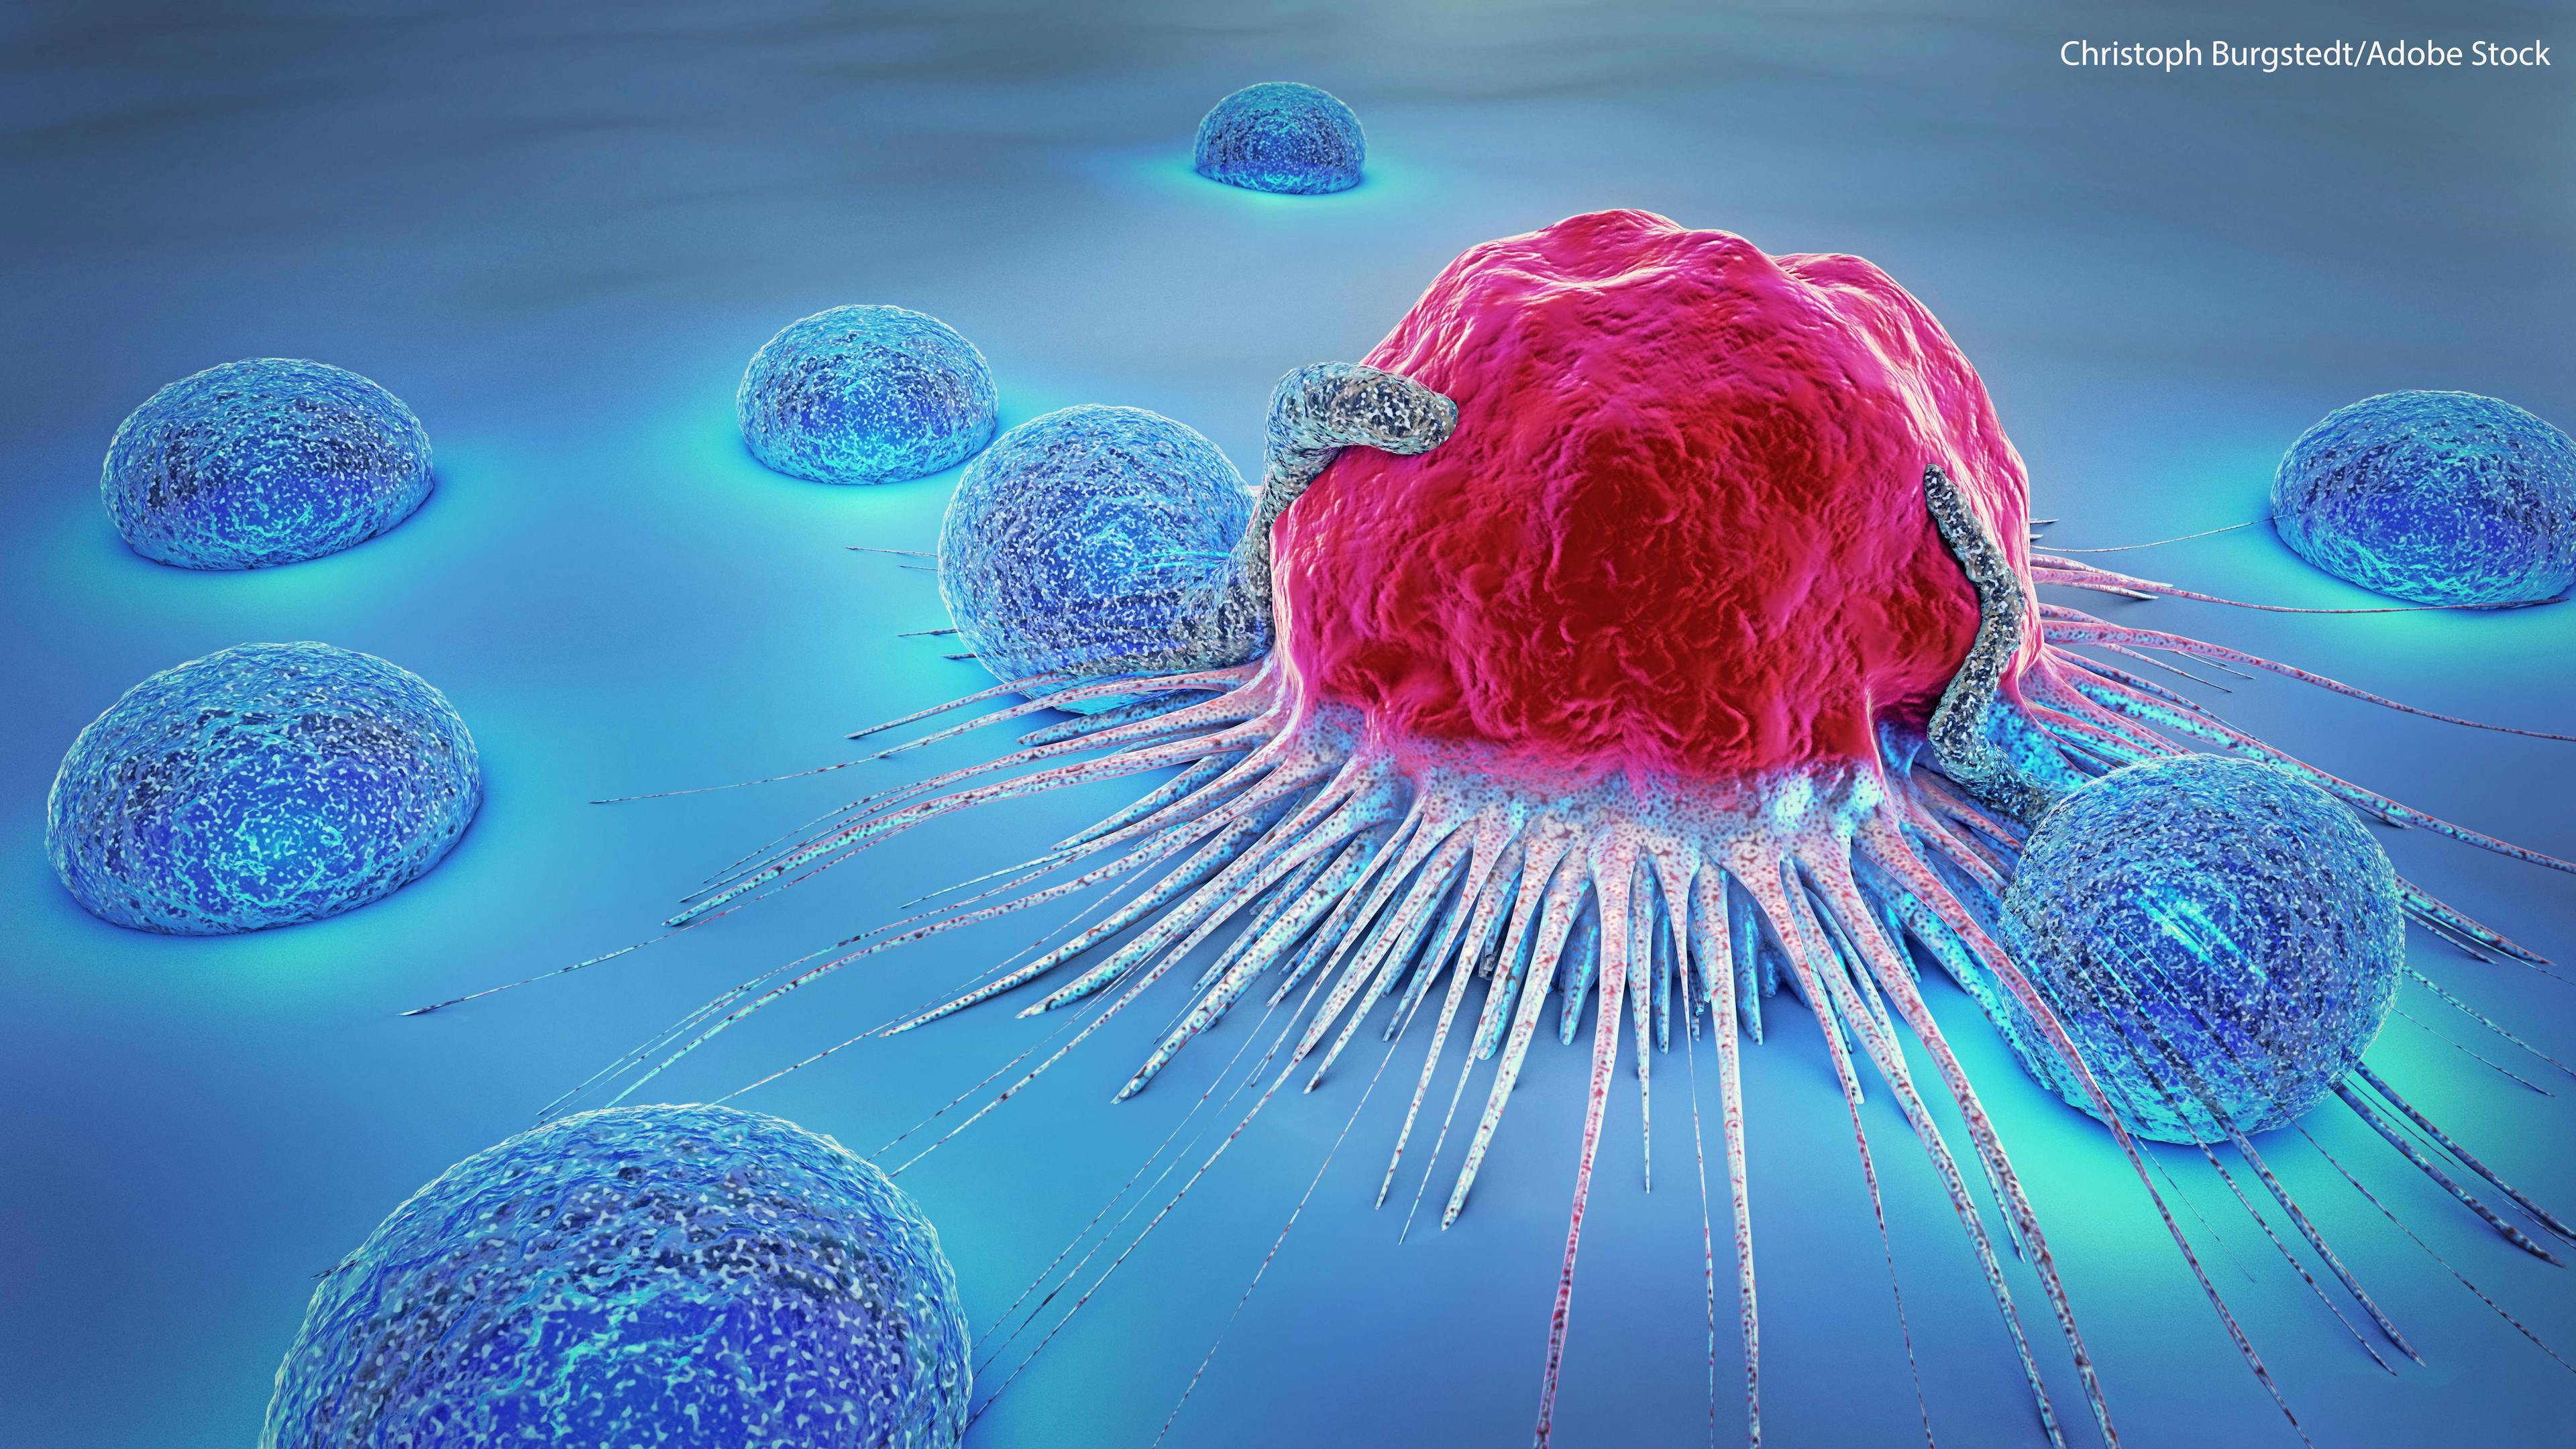 Previous data on the anti-cancer activity of BLU-222 in ovarian cancer models were presented at the 2022 American Association for Cancer Research Annual Meeting (AACR).